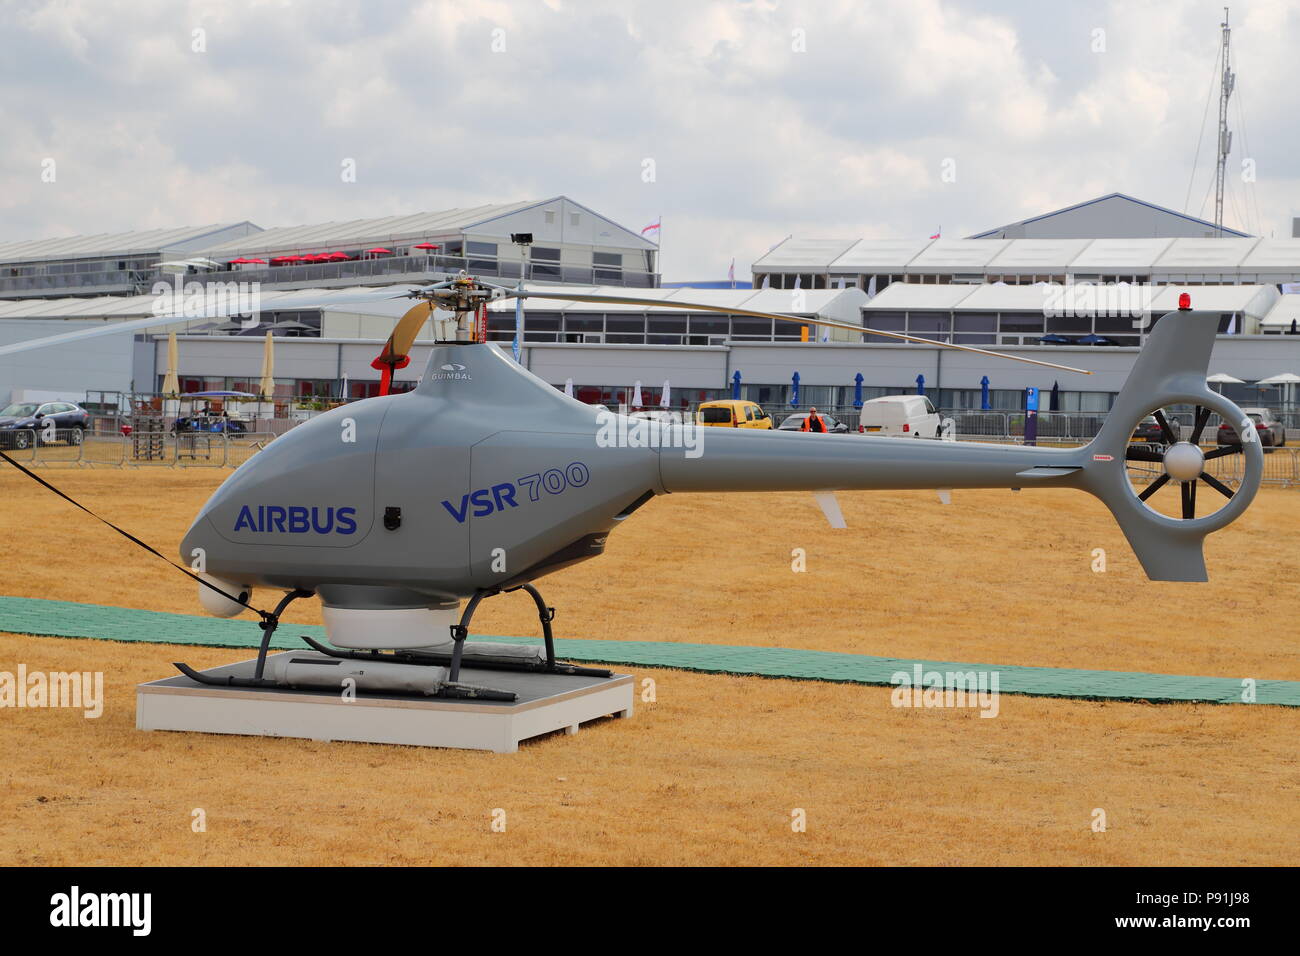 Farnborough, UK, 14 July 2018. The Airbus VSR700, an unmanned drone, which can operate up to 13 hours in the sky. Credit: Uwe Deffner/Alamy Live News Stock Photo